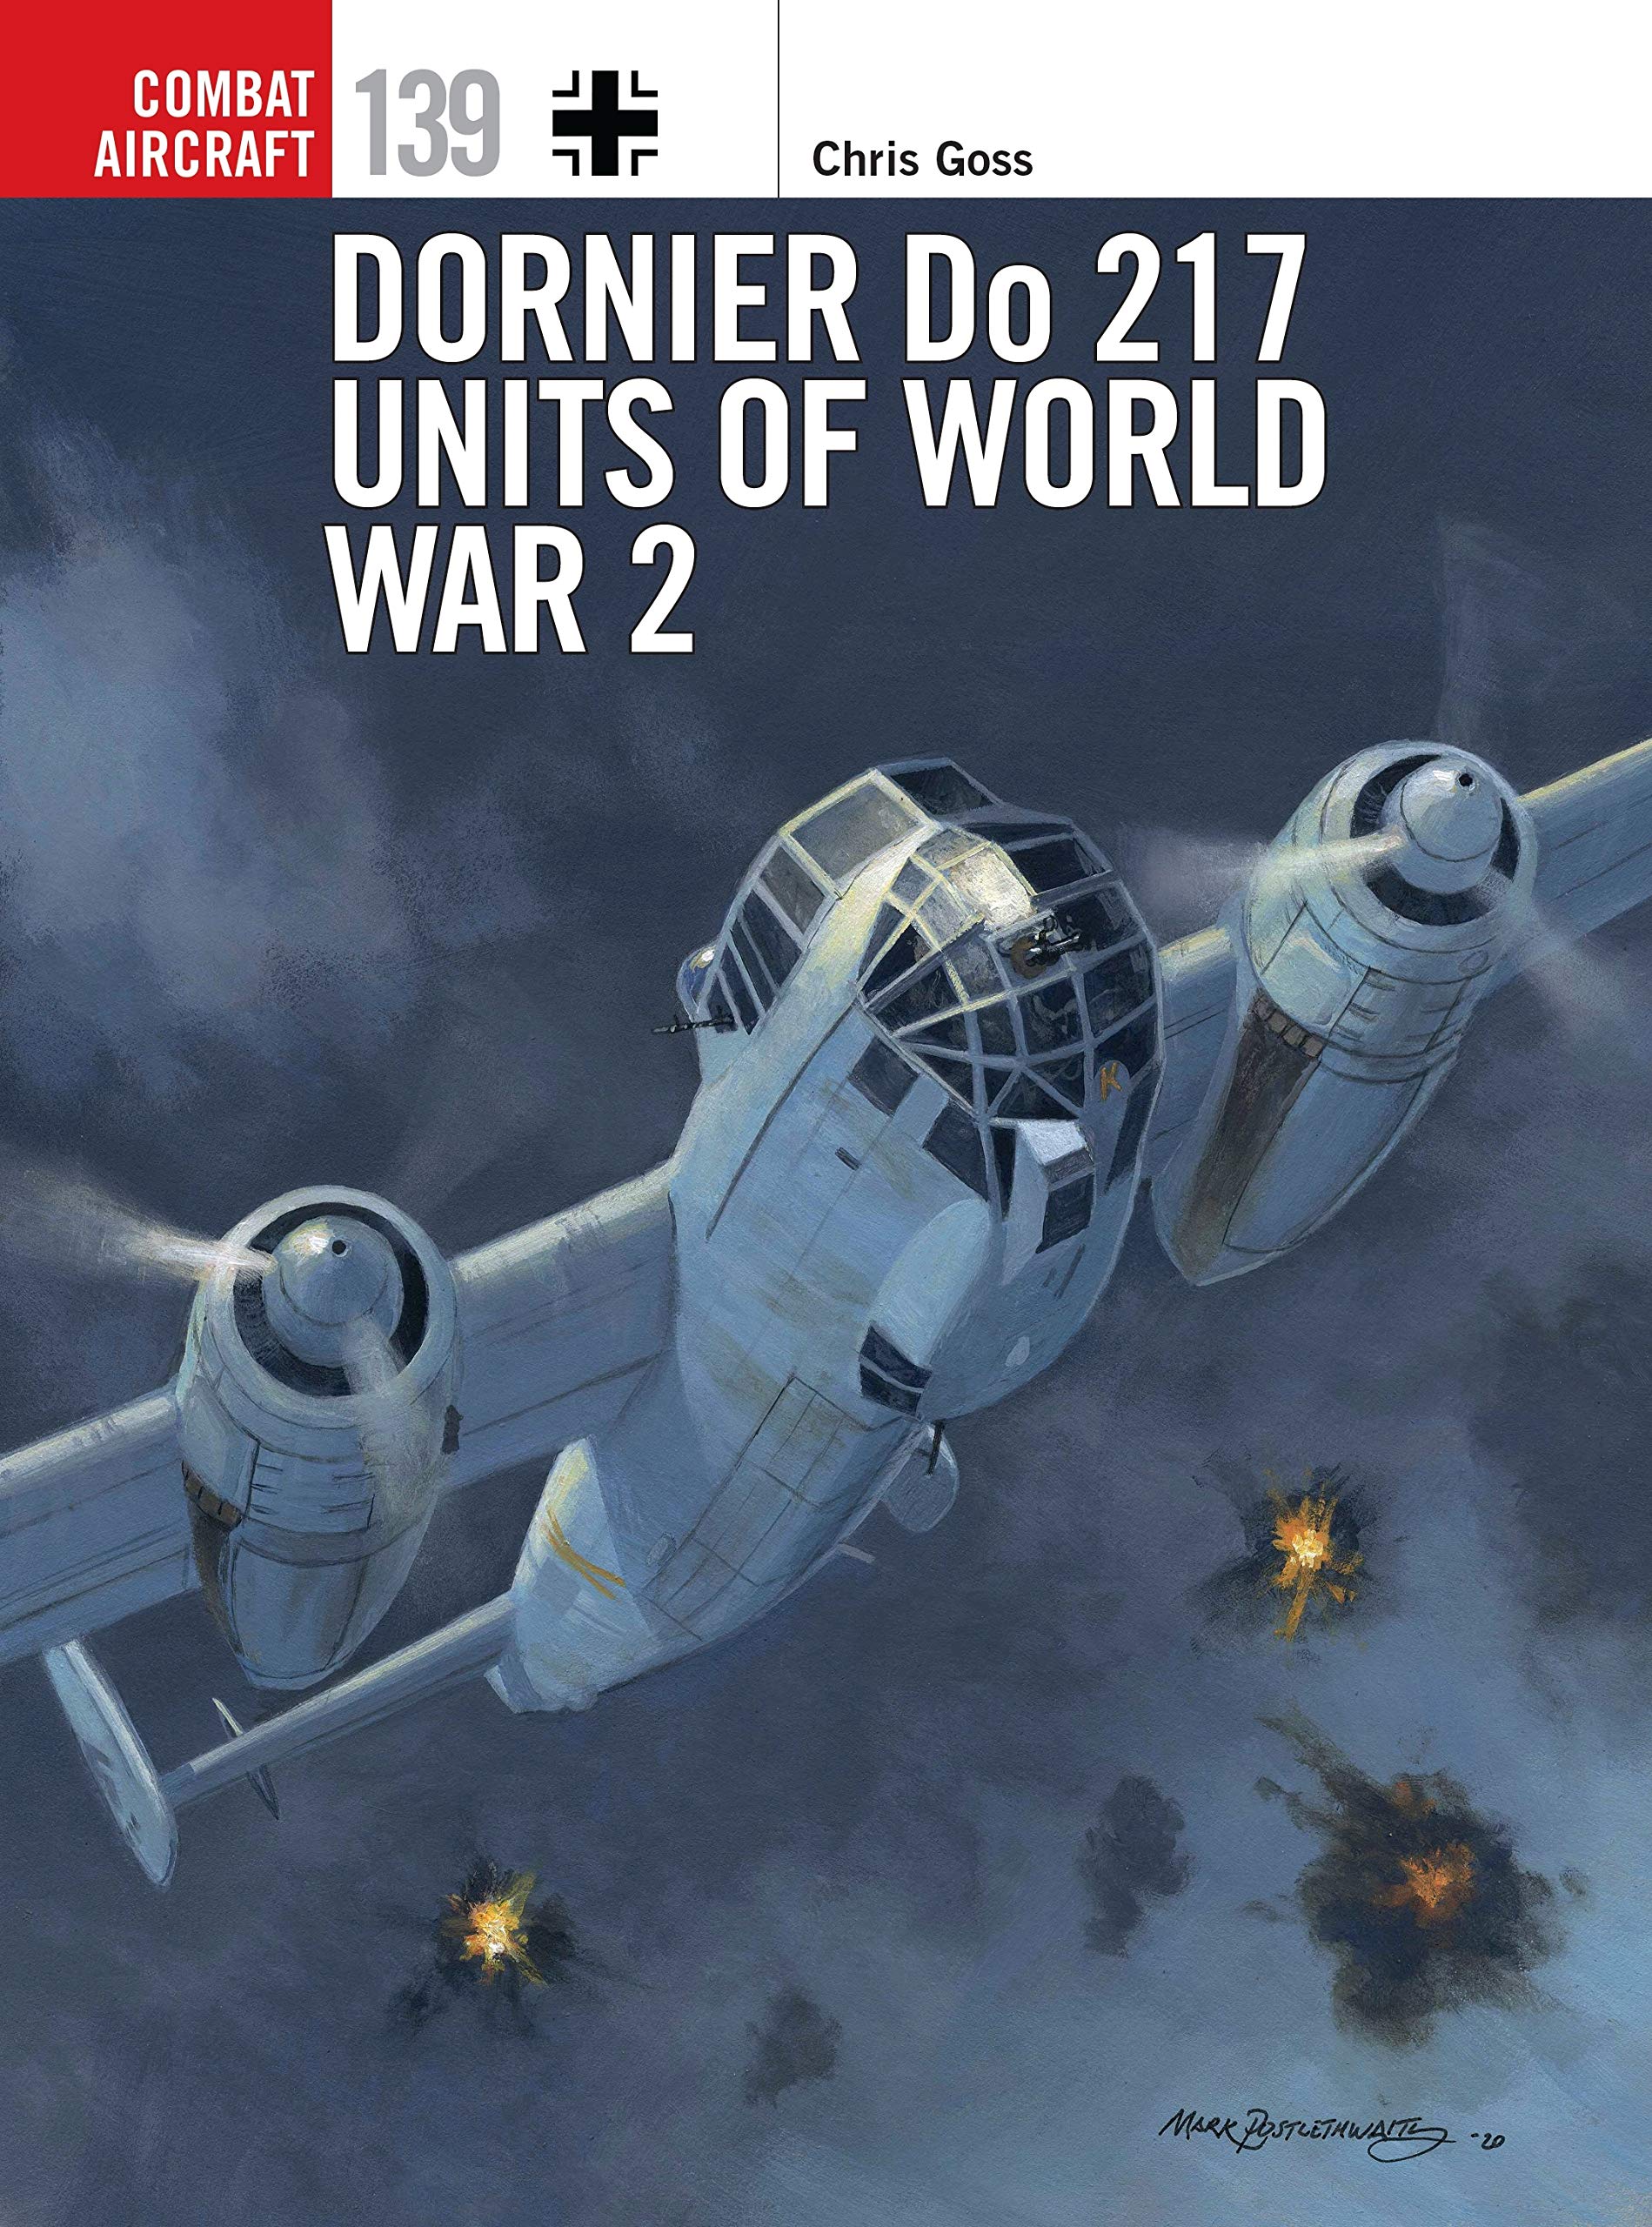 Dornier Do 217 Units of World War 2 Review: Its Predecessor Was Called the Flying Pencil